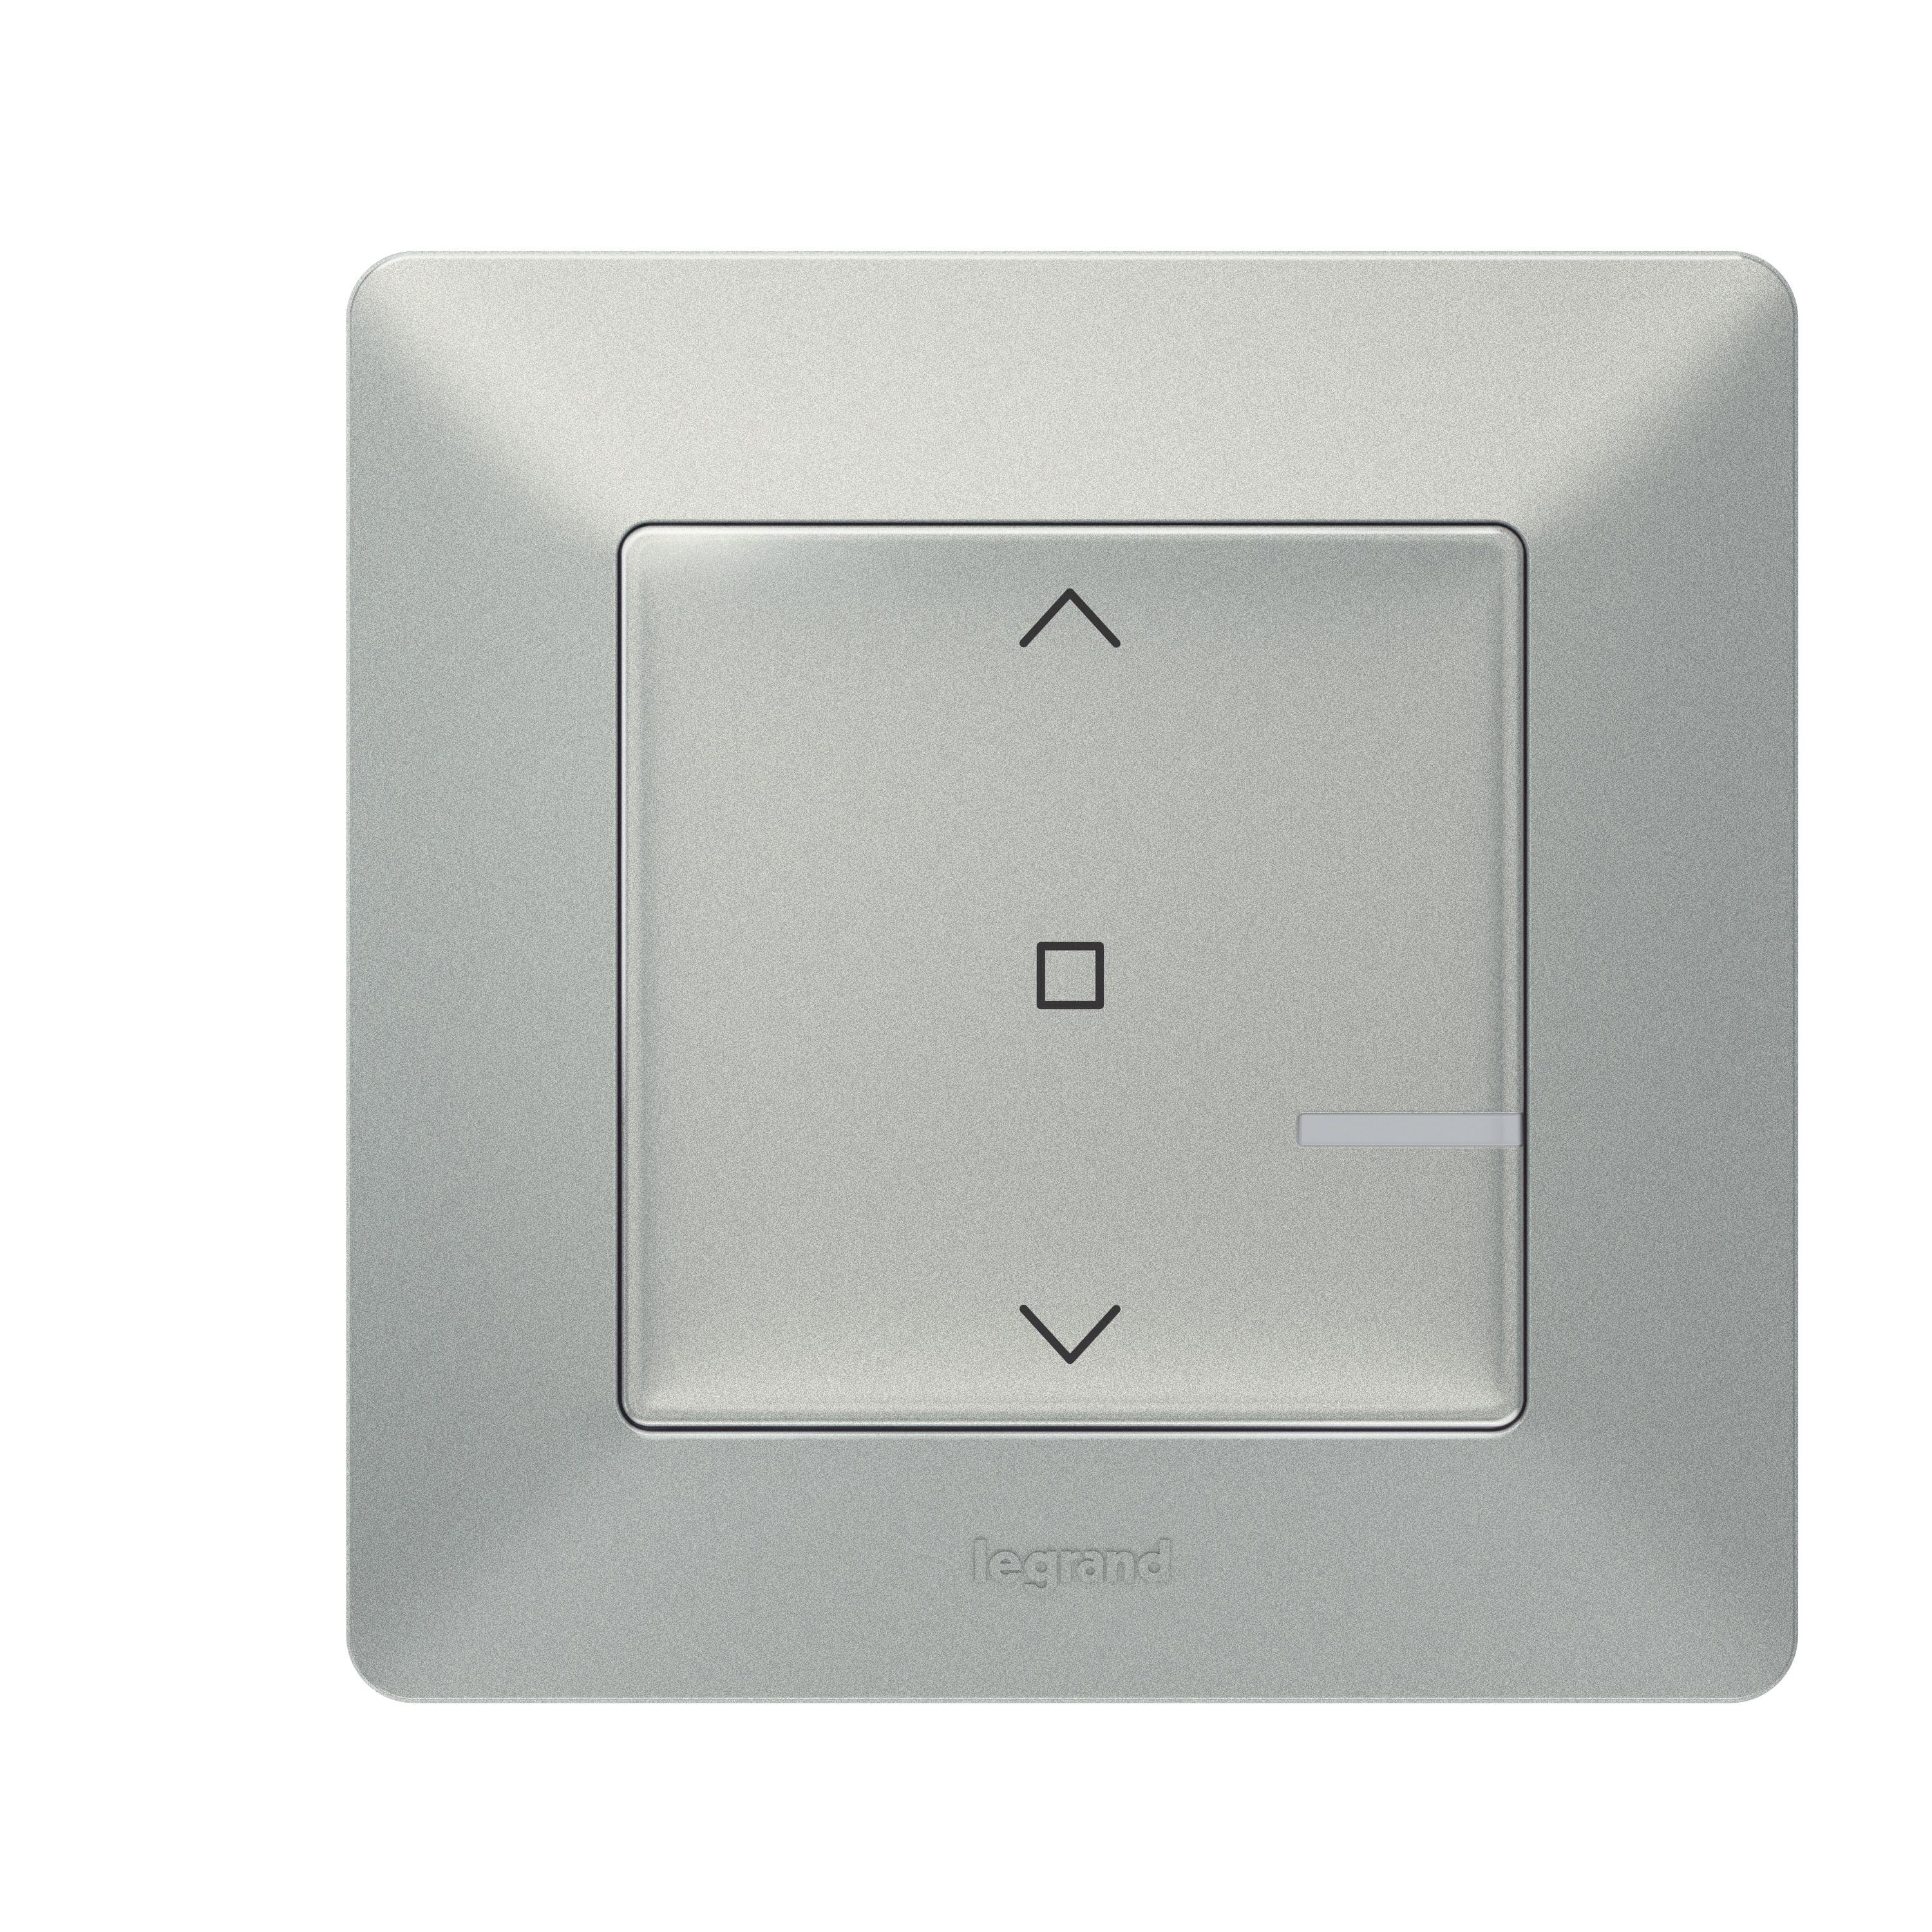 Connected roller shutter switch Valena Life with Netatmo 